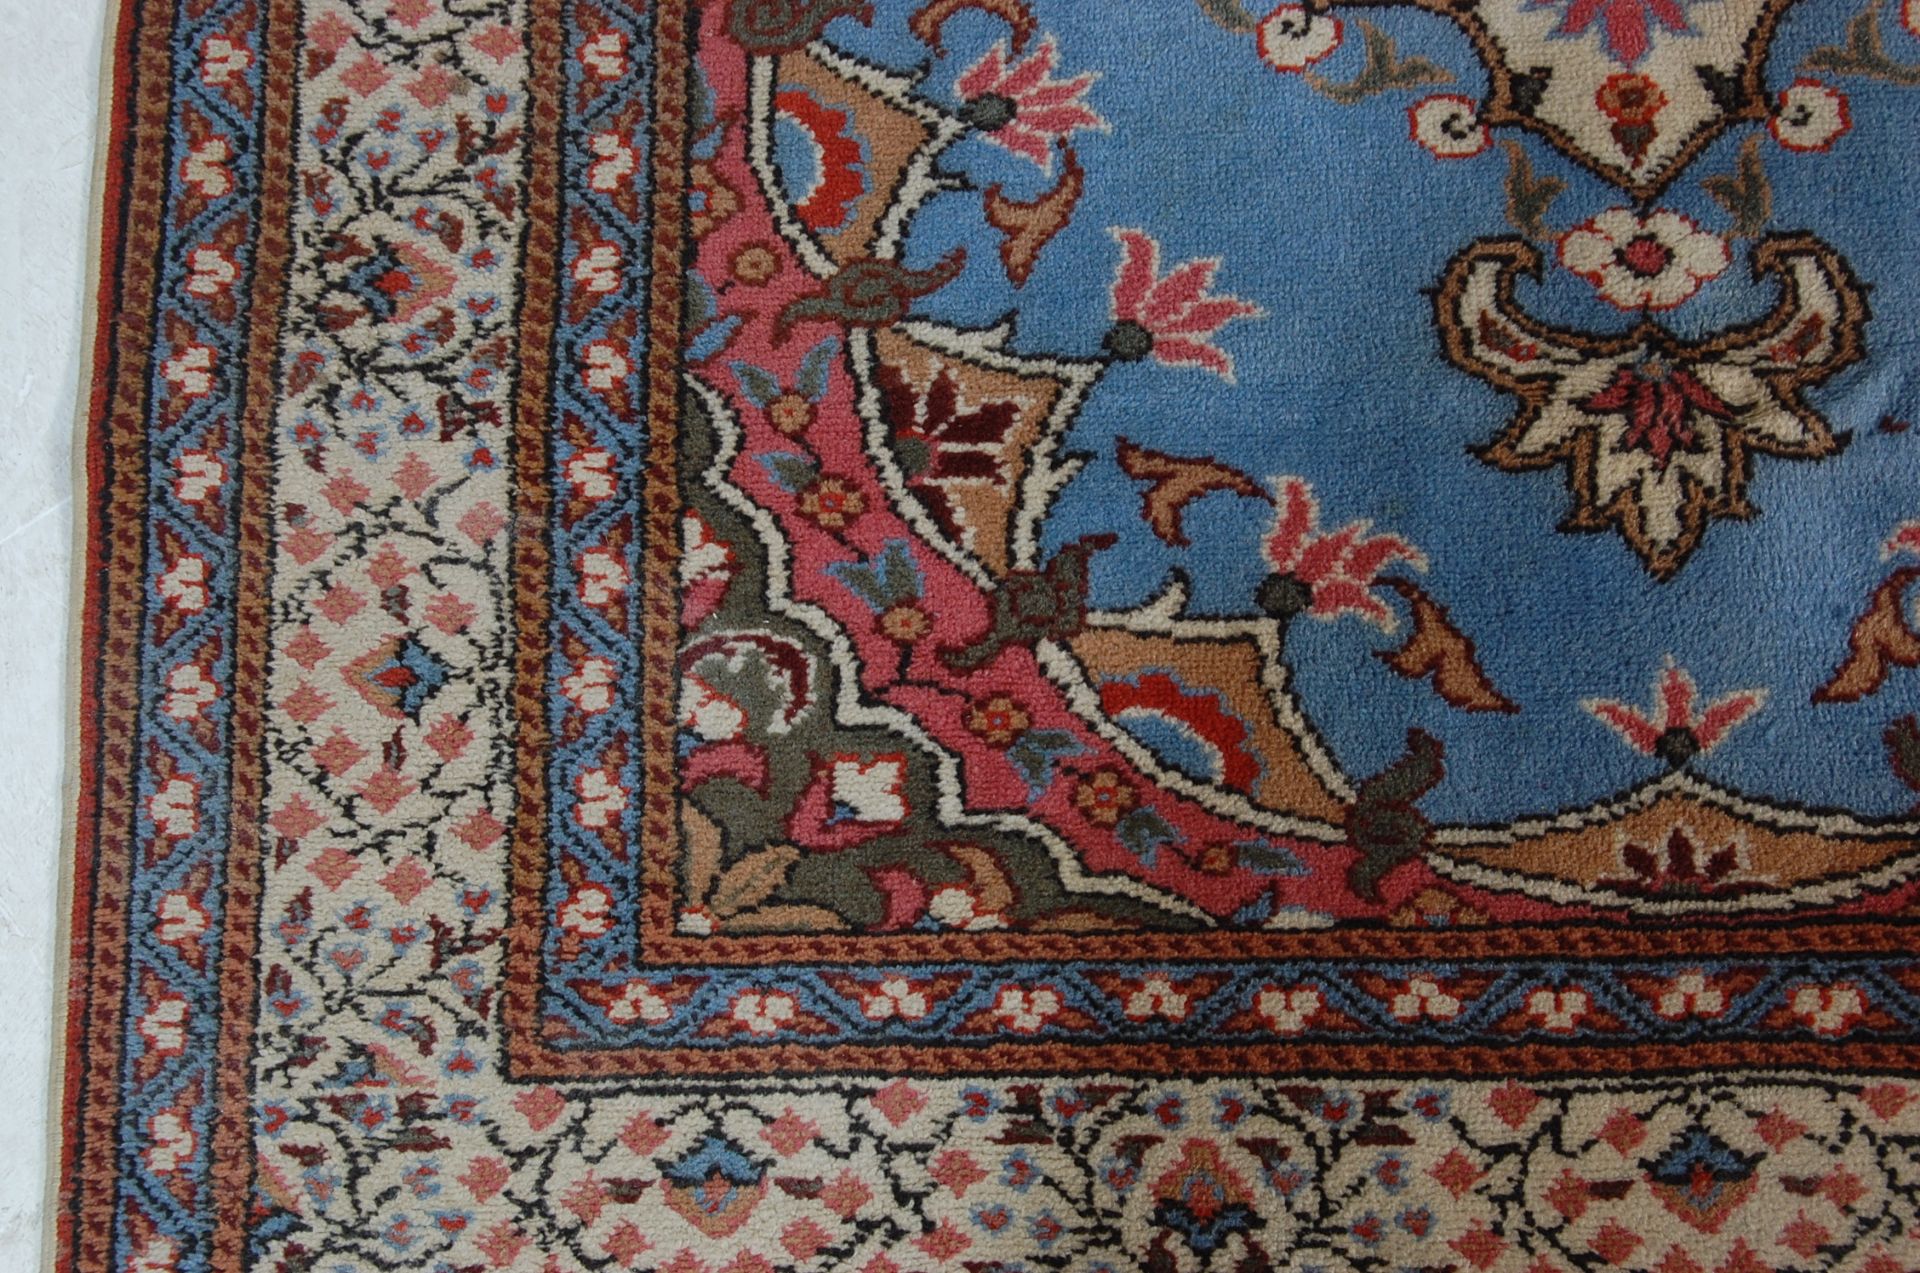 20TH CENTURY TURKISH / ISLAMIC CARPET RUG WITH SINGLE MEDALLION ON A BLUE FIELD - Image 4 of 5